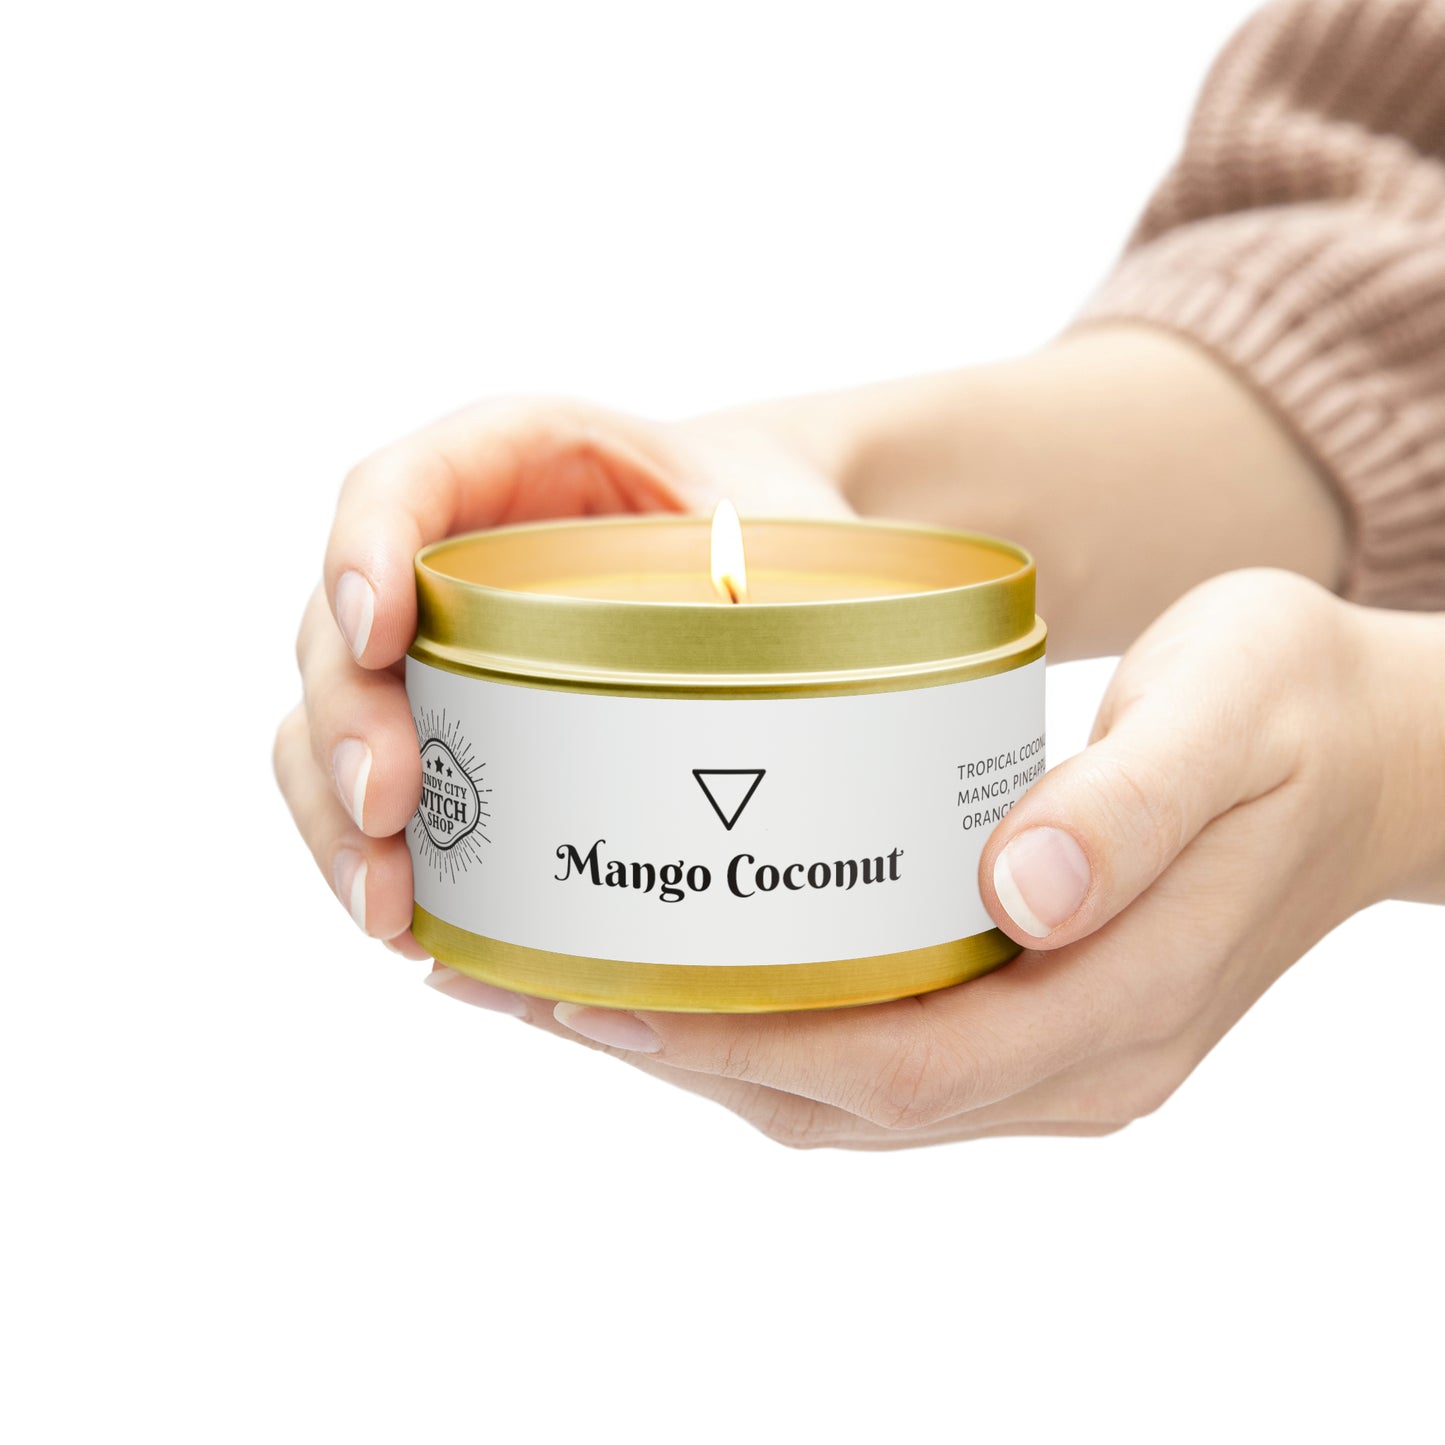 Mango Coconut - tin candle, scented